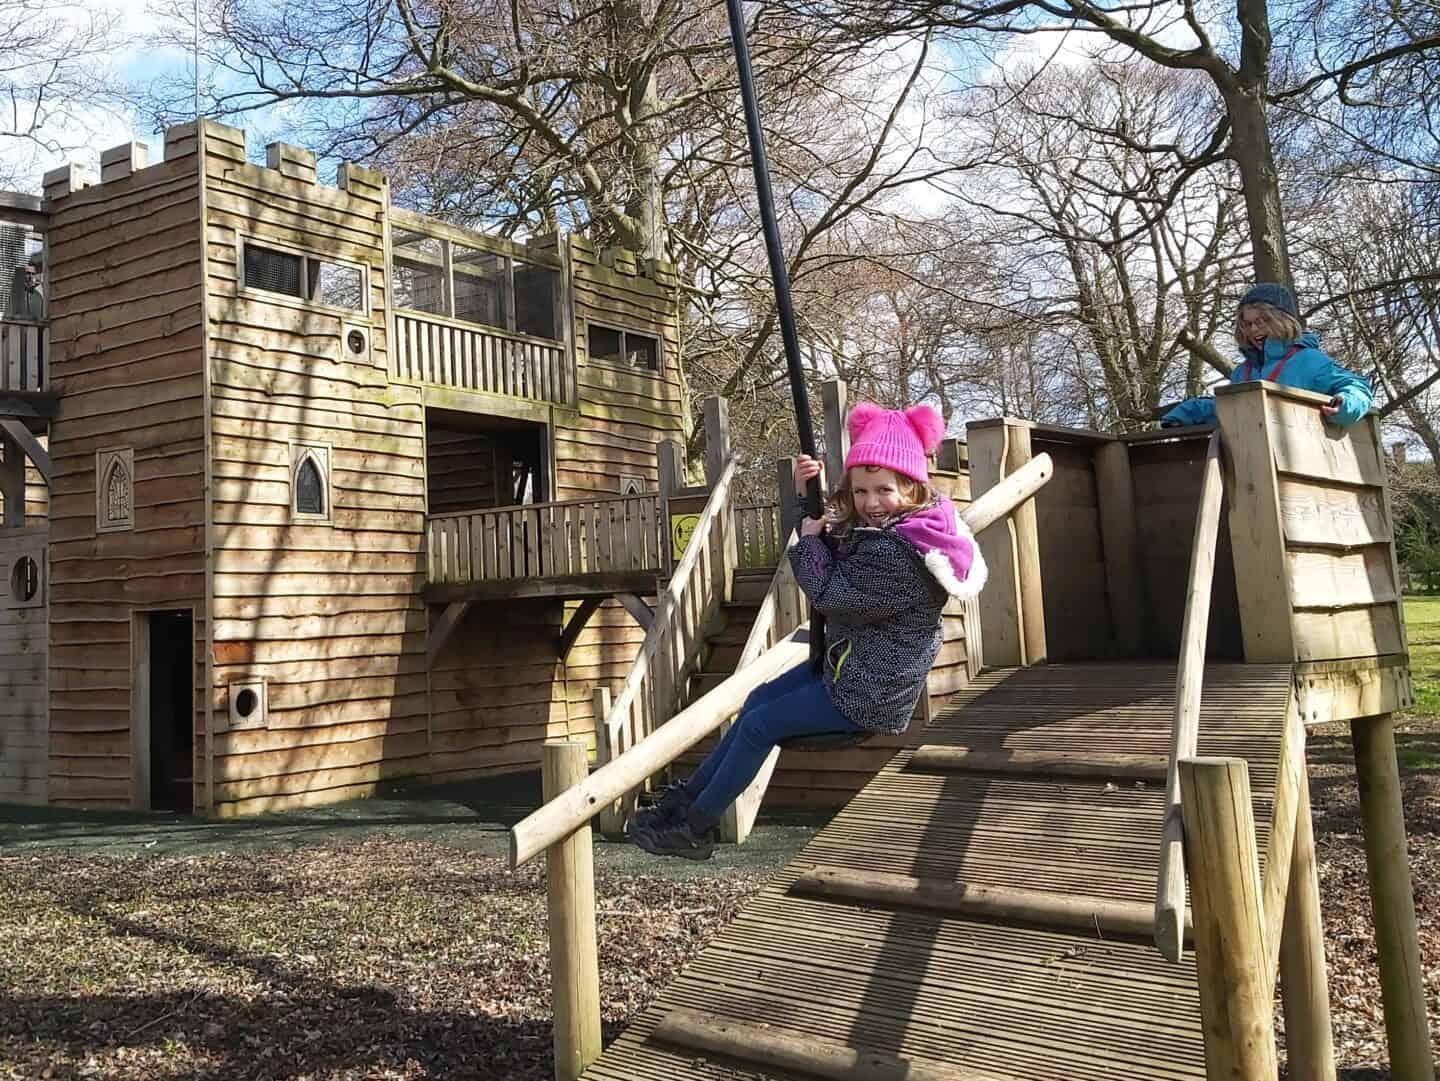 Lia on the zip wire at Sudeley Castle adventure playground